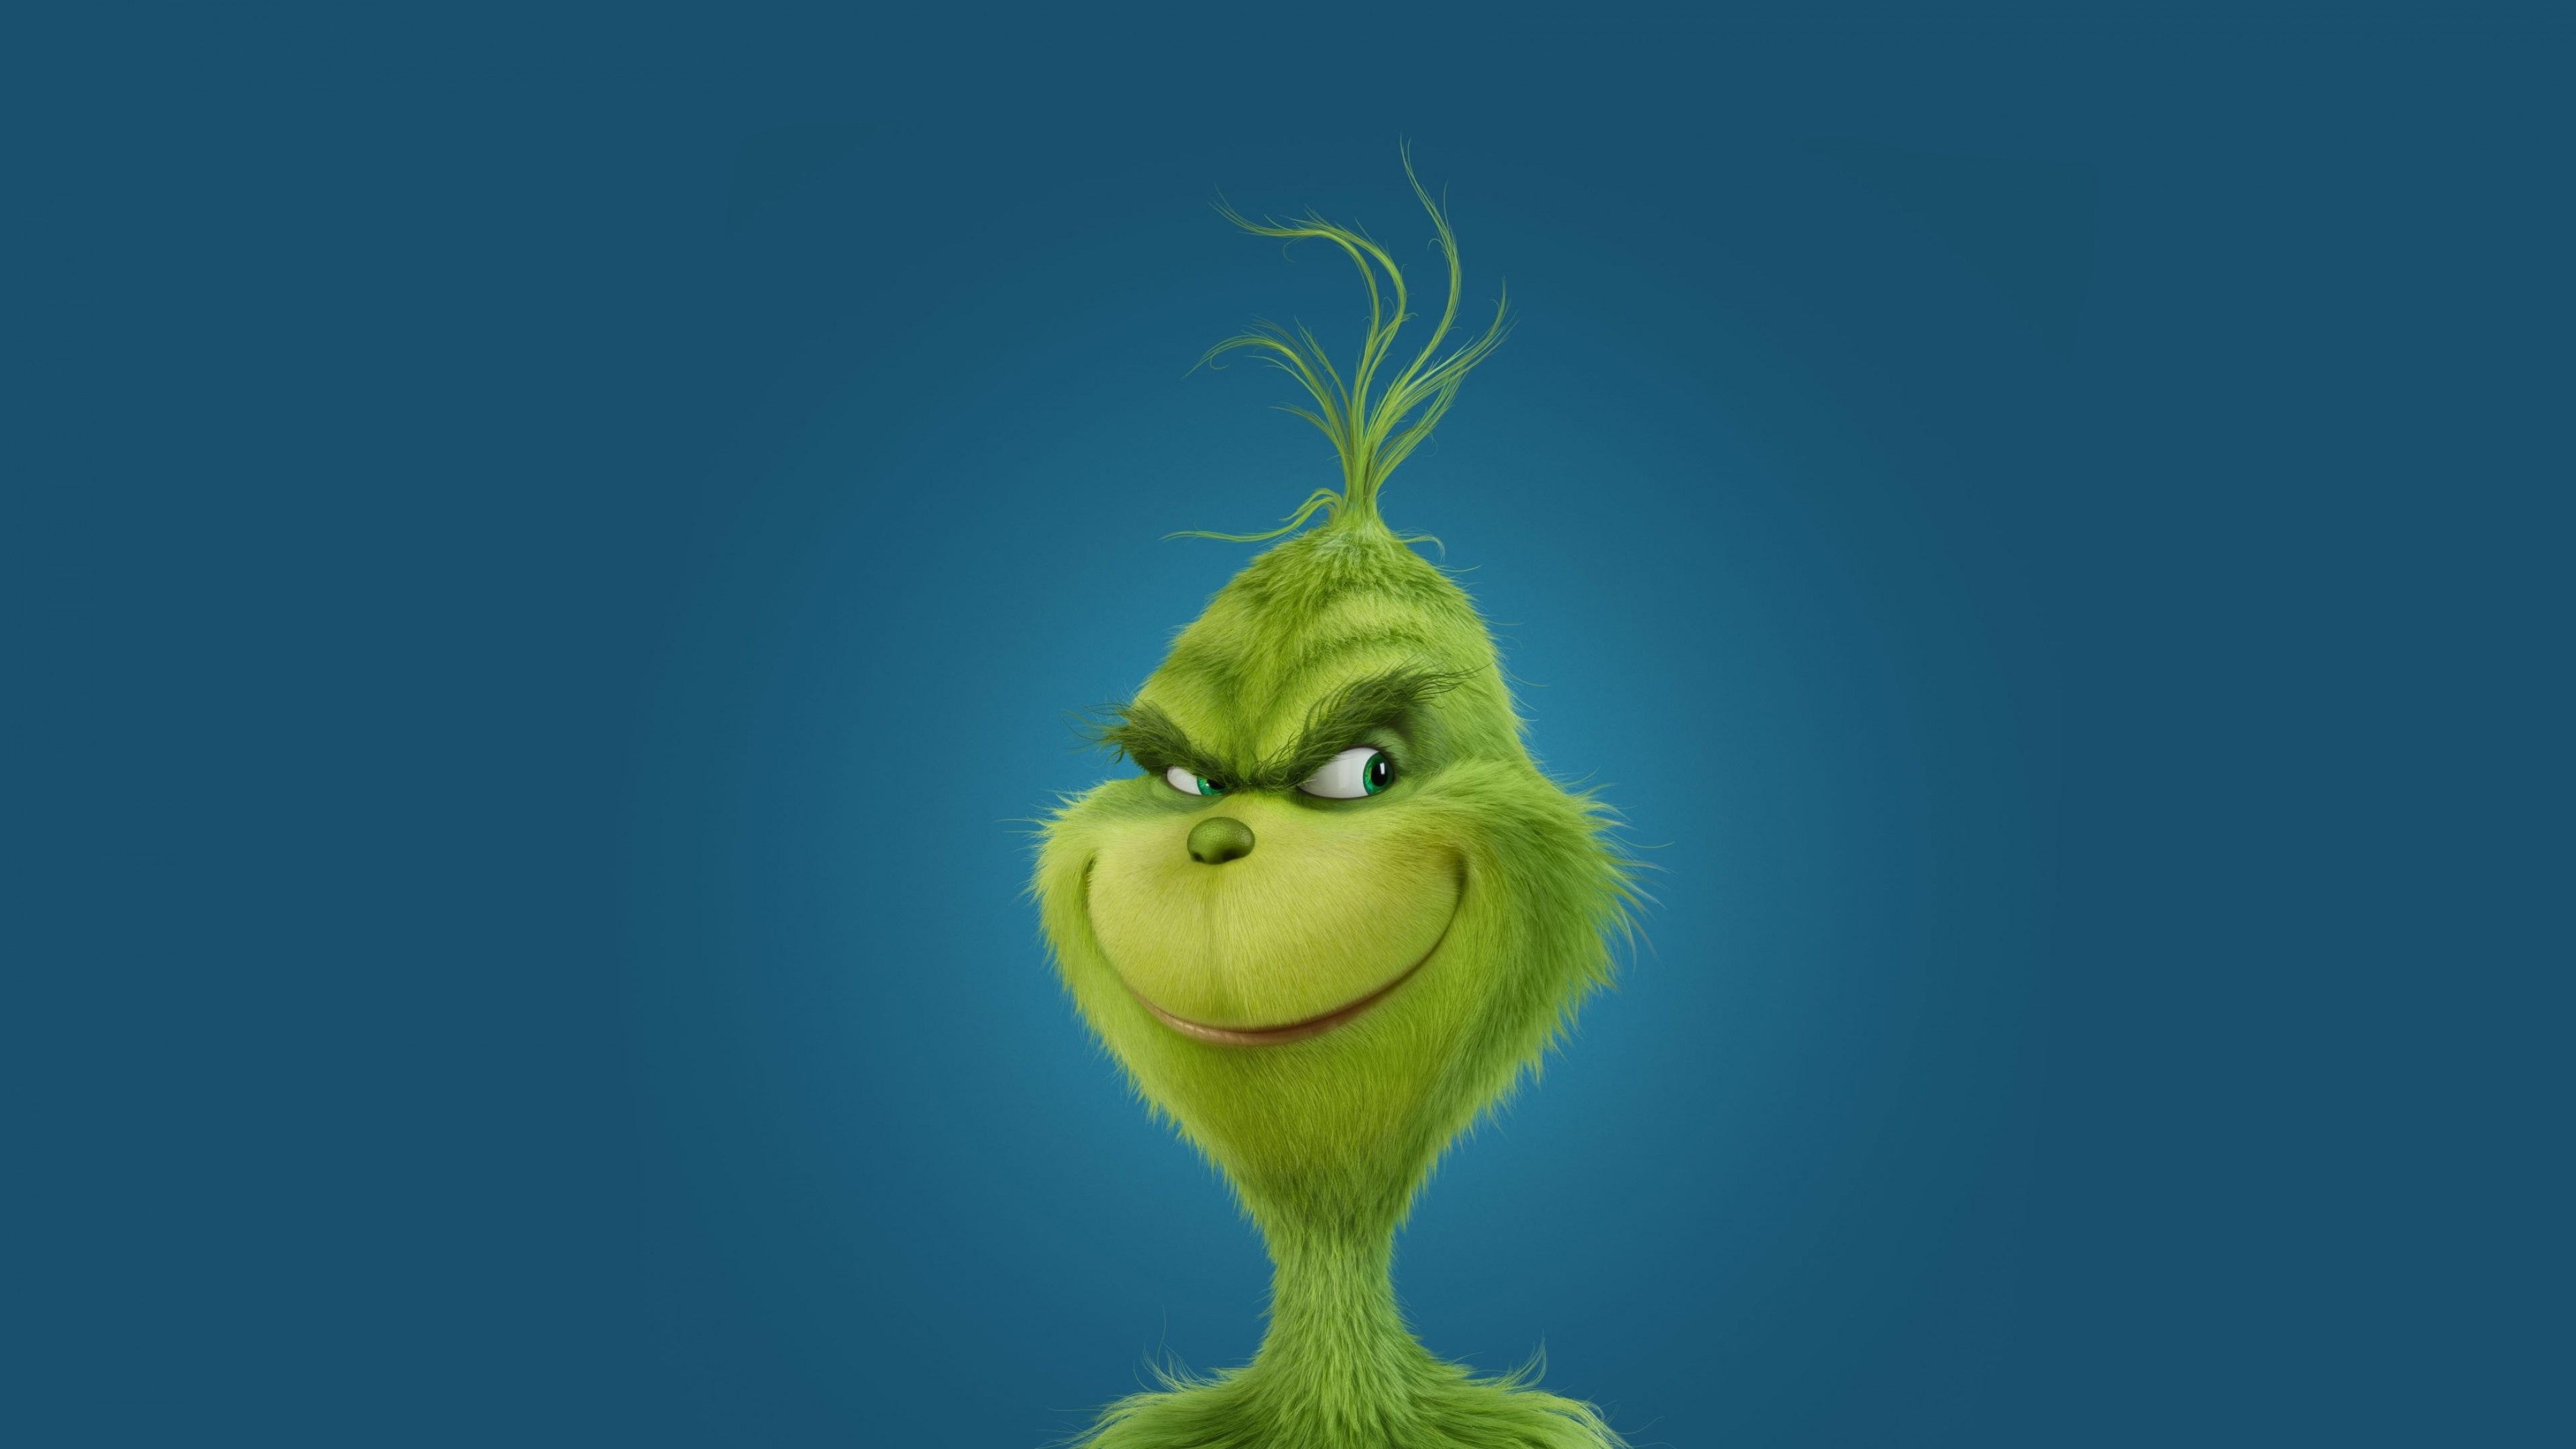 General 3840x2160 The Grinch creature simple background blue background artwork minimalism green